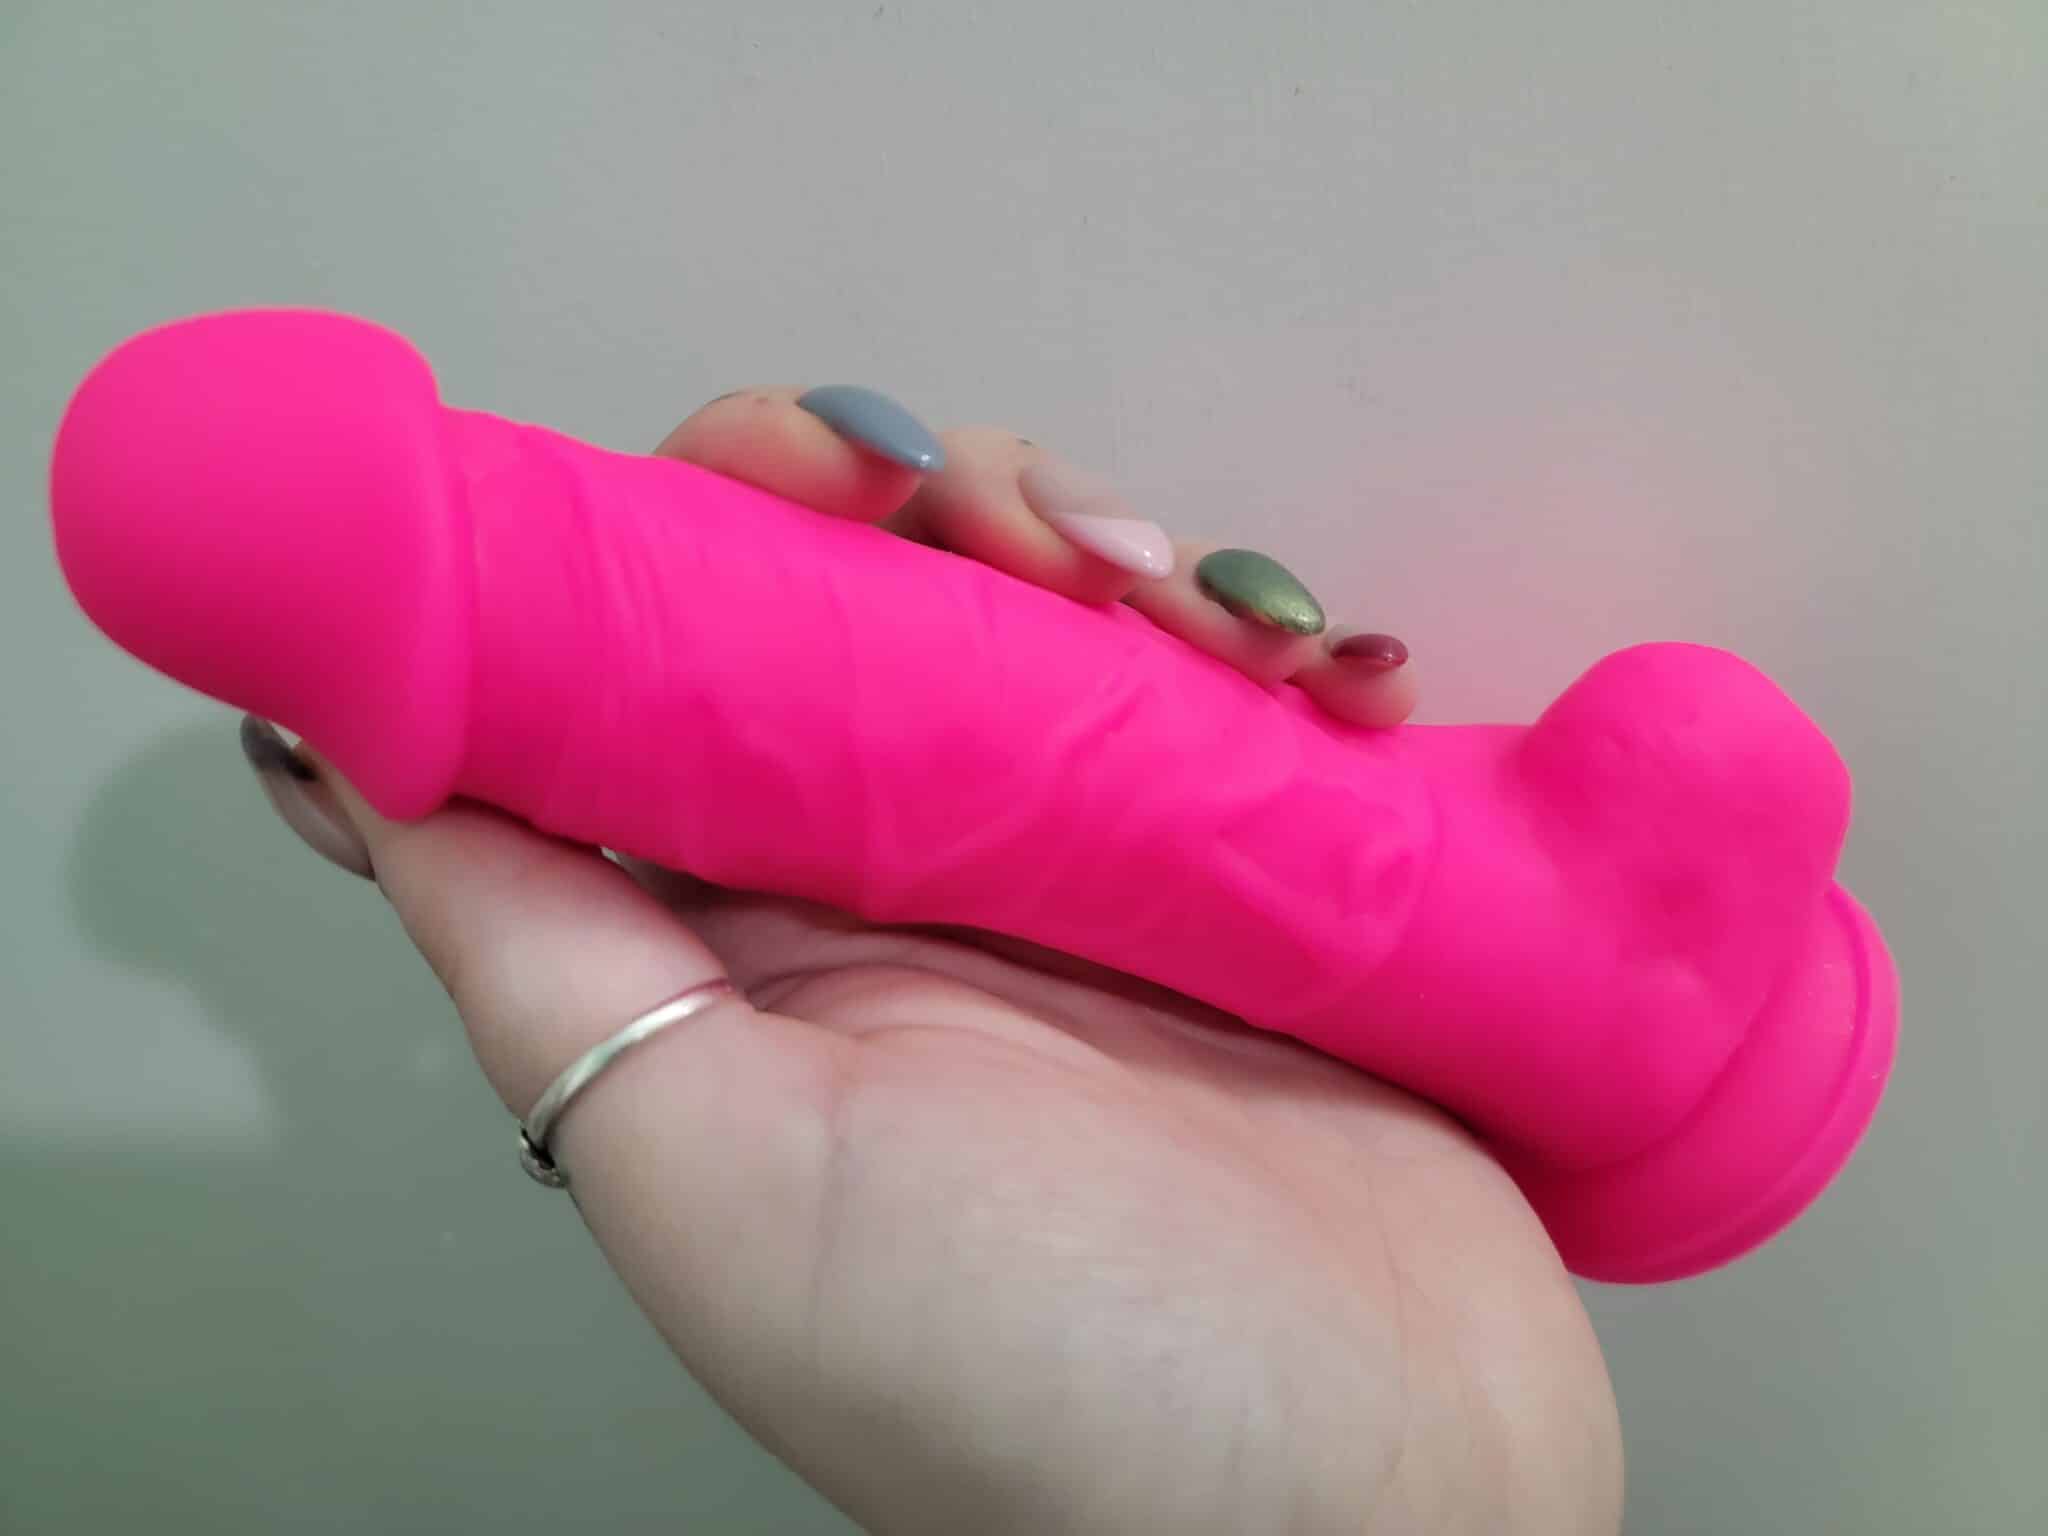 Colours Pleasures 5 Inch Dildo Assessing the Colours Pleasures 5 Inch Dildo’s Quality